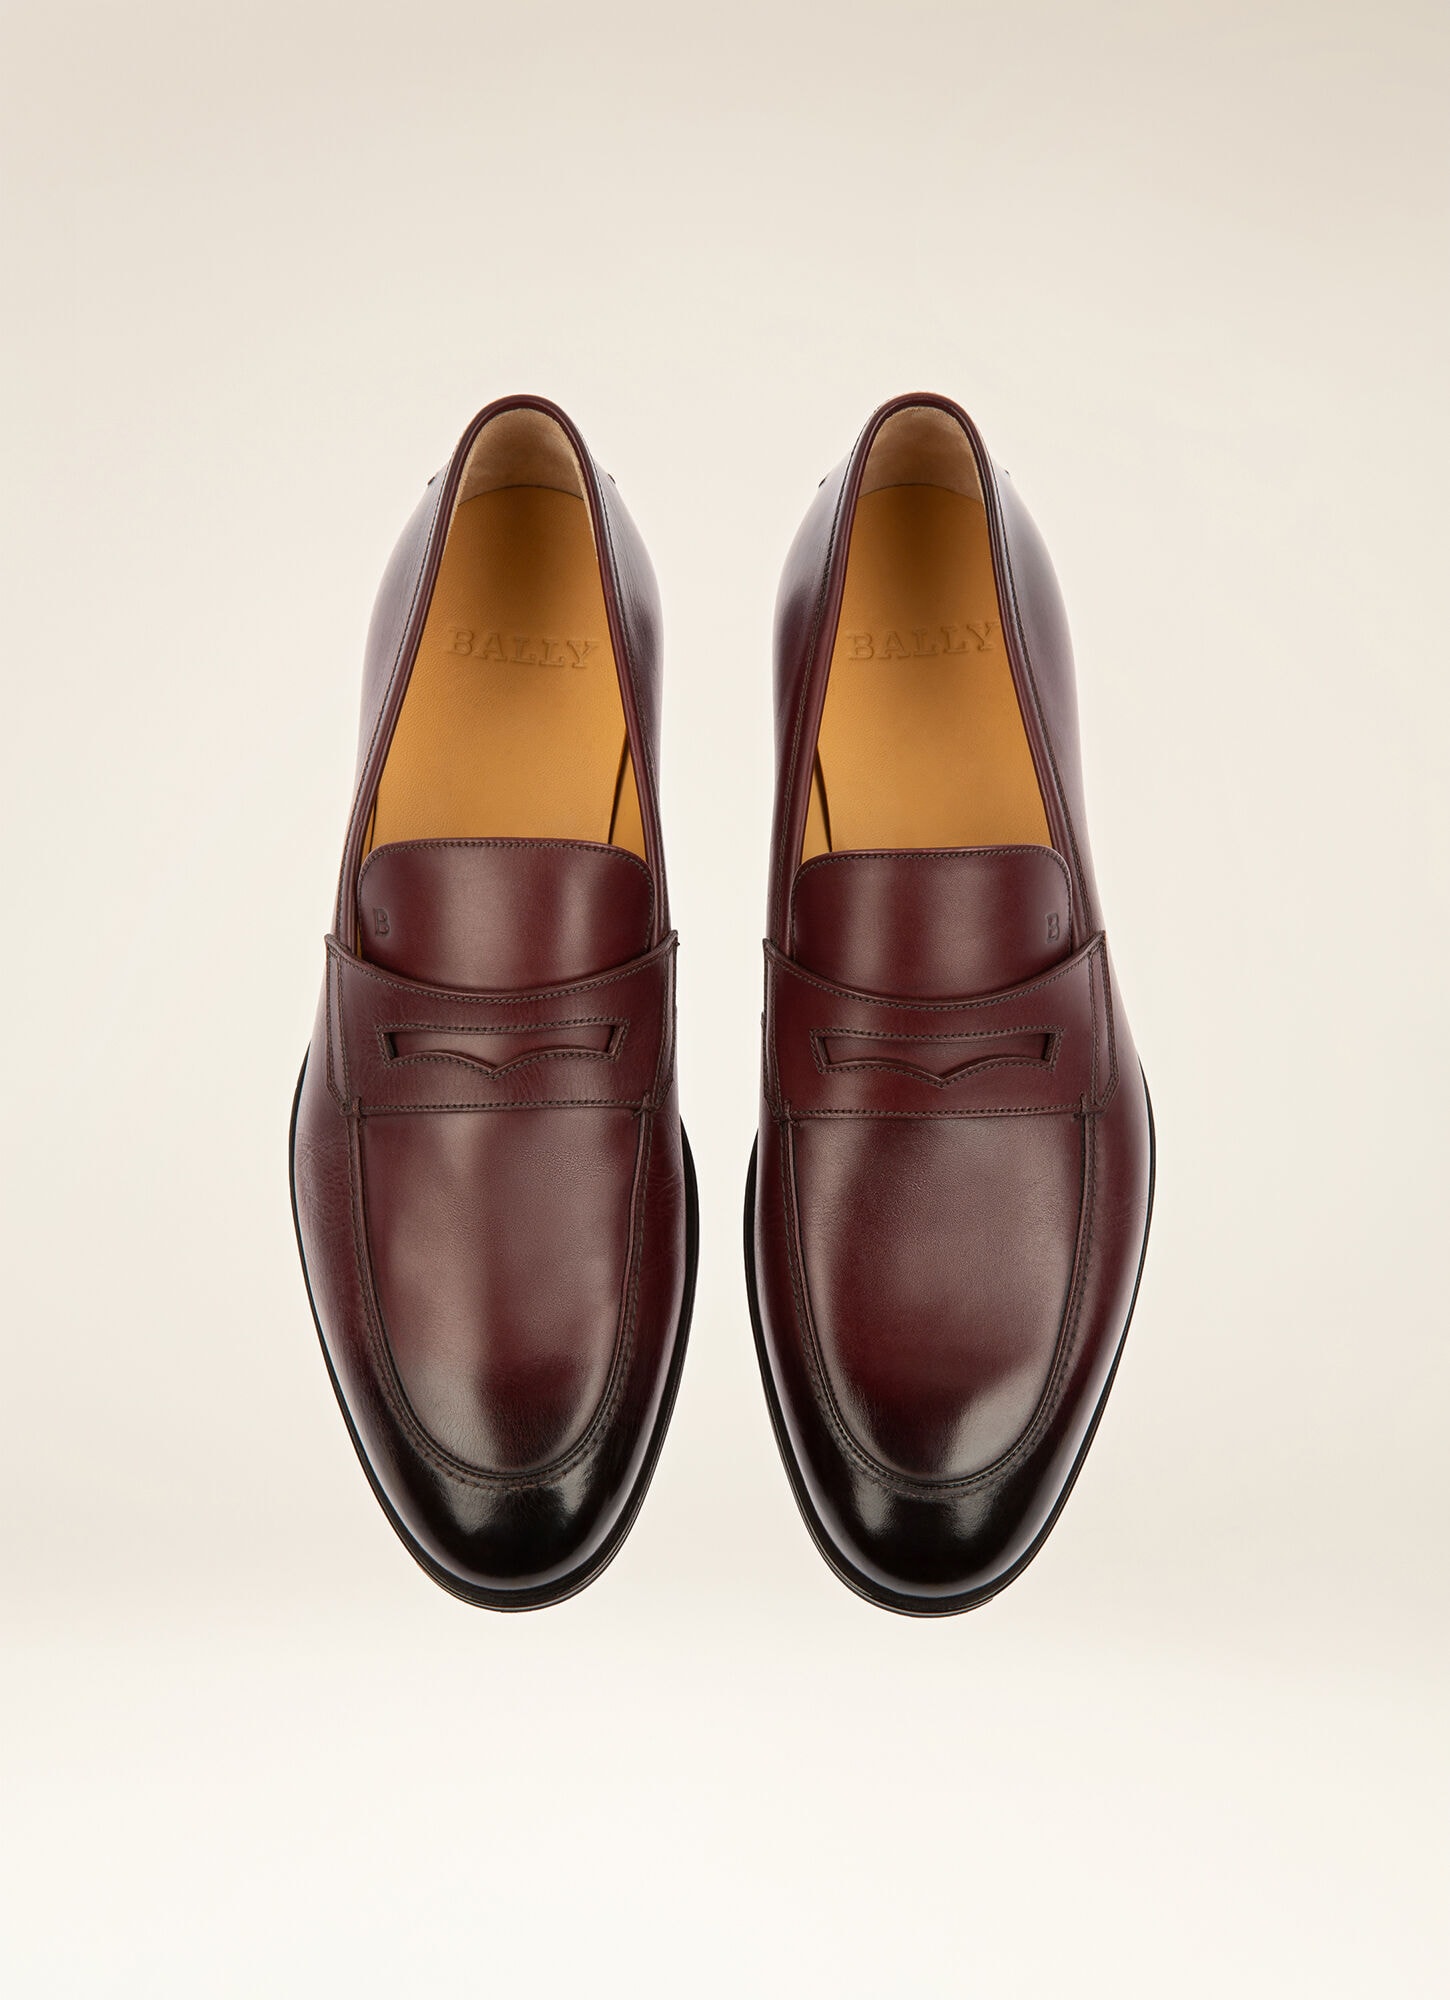 bally slip on loafers